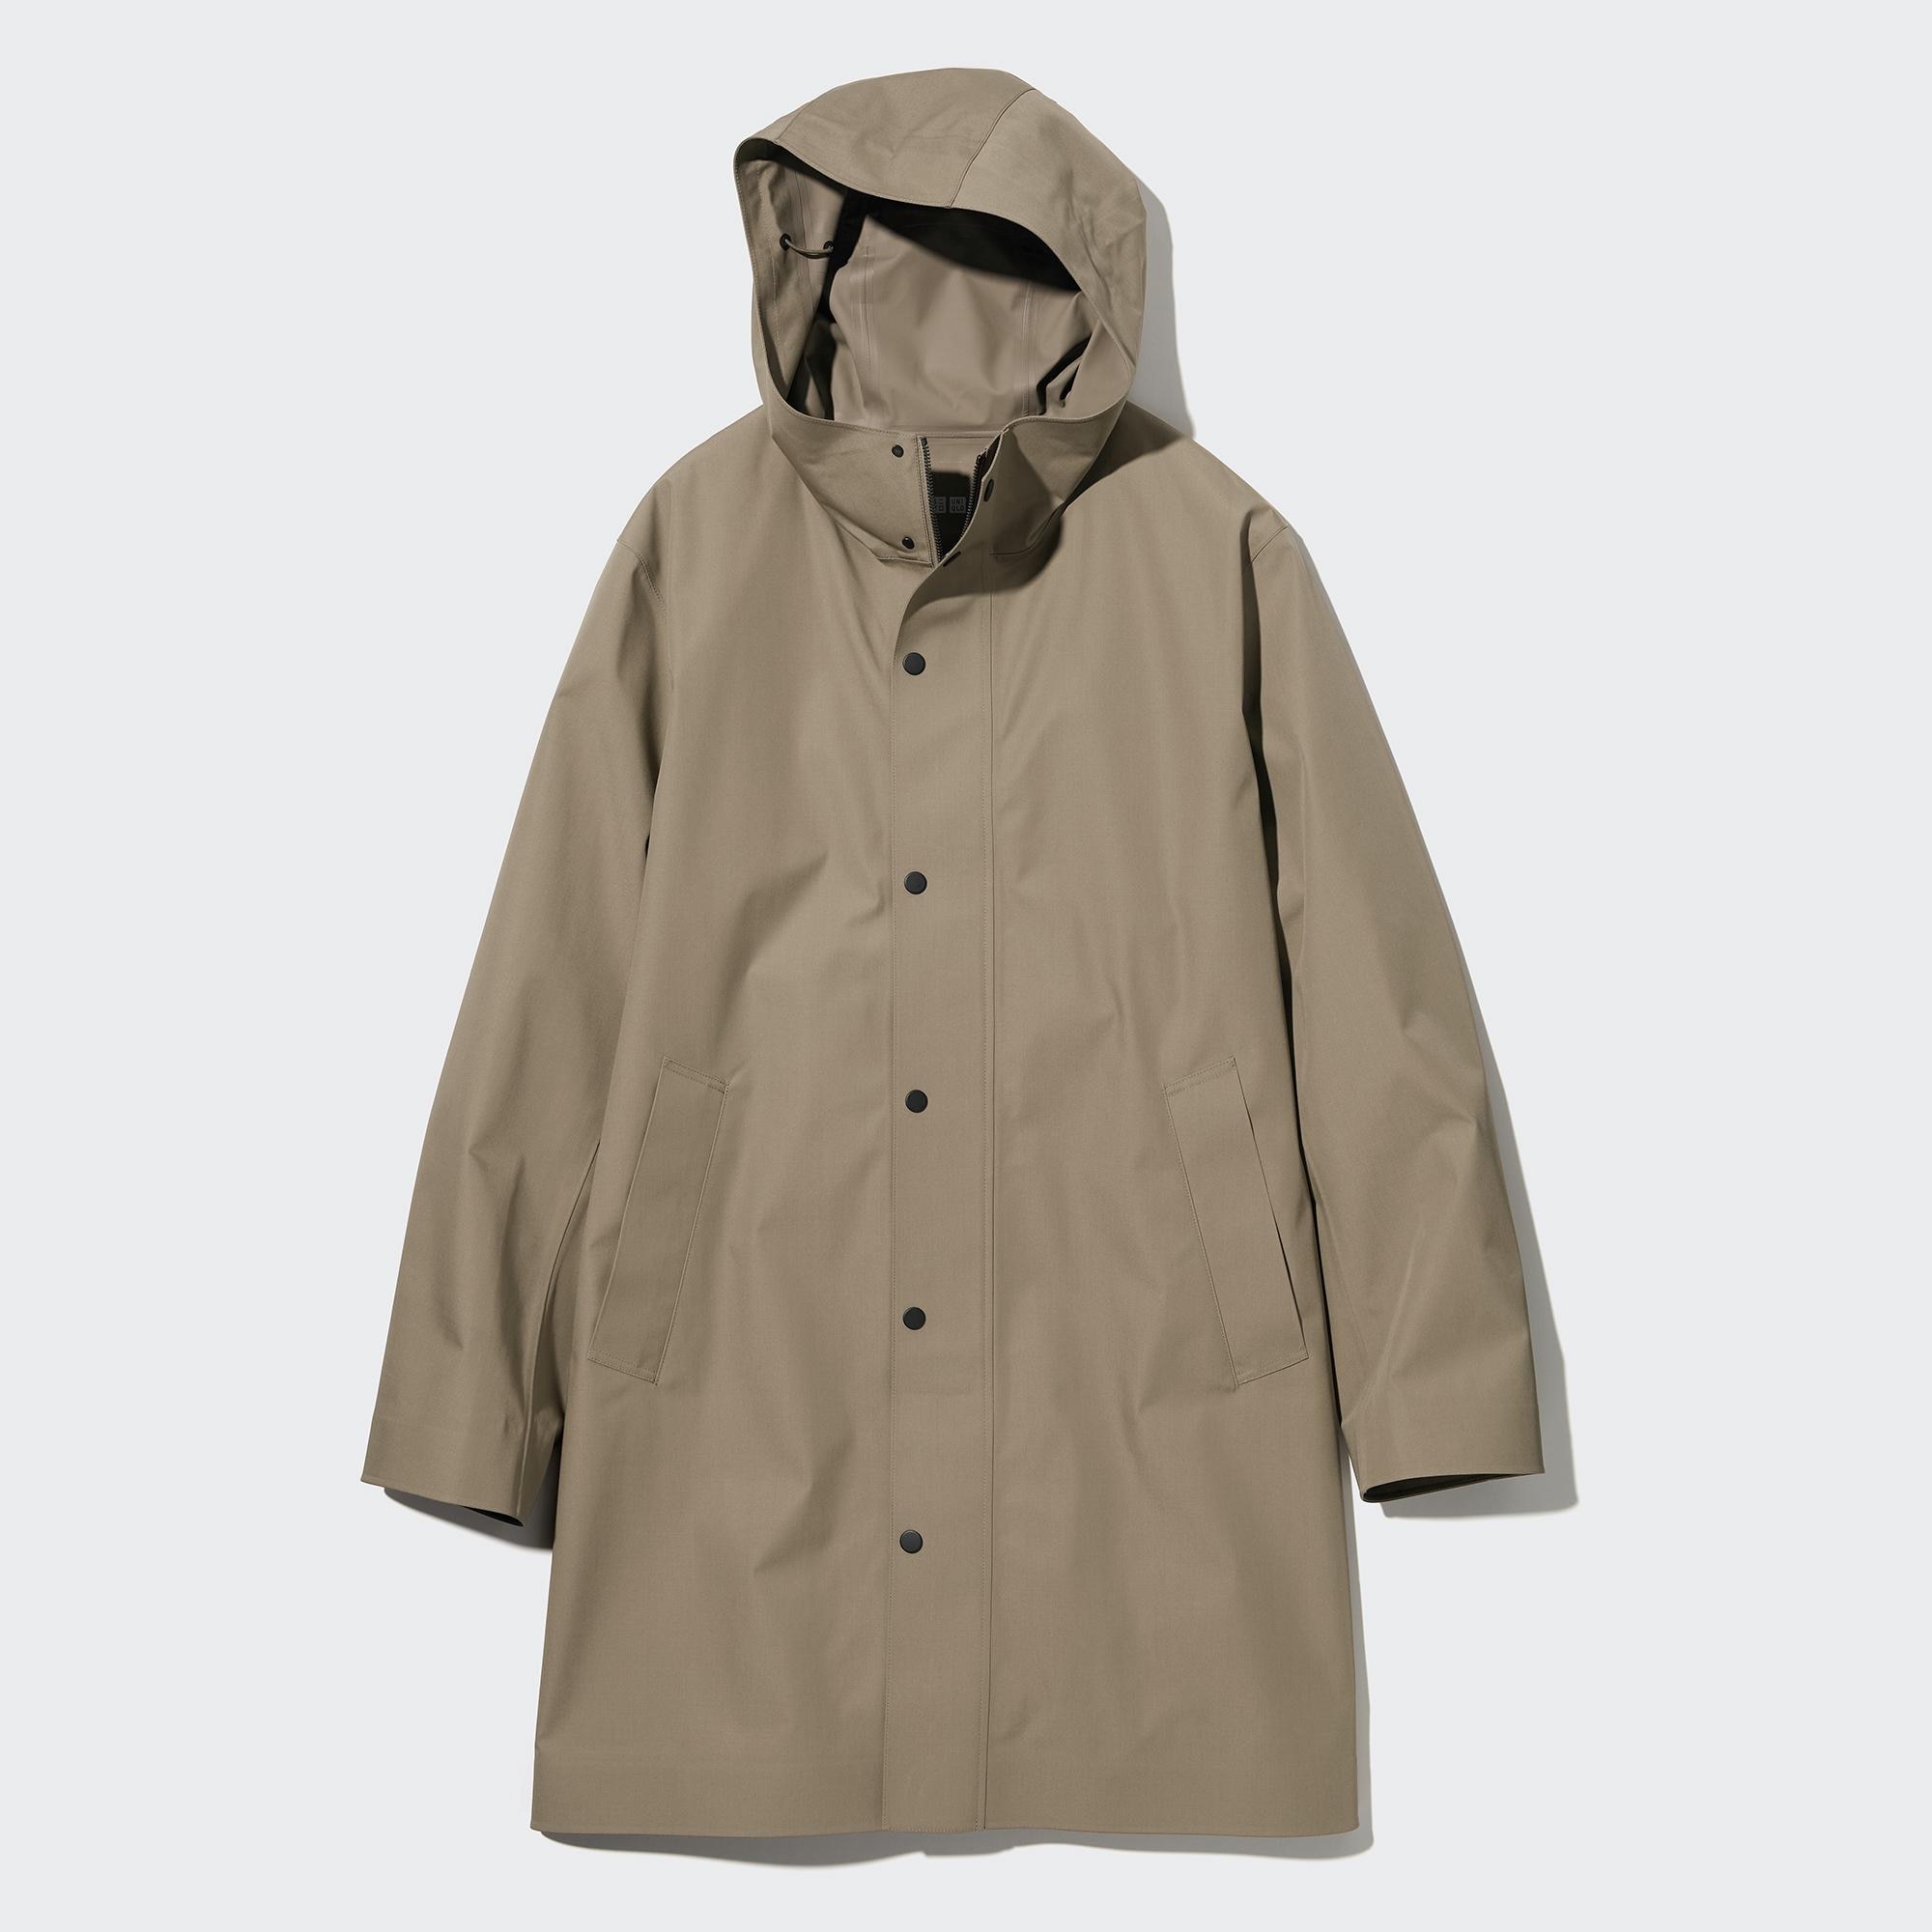 Uniqlo Ultra Light Down Parka Review 2019  Down Jacket Review   Backpackerscom